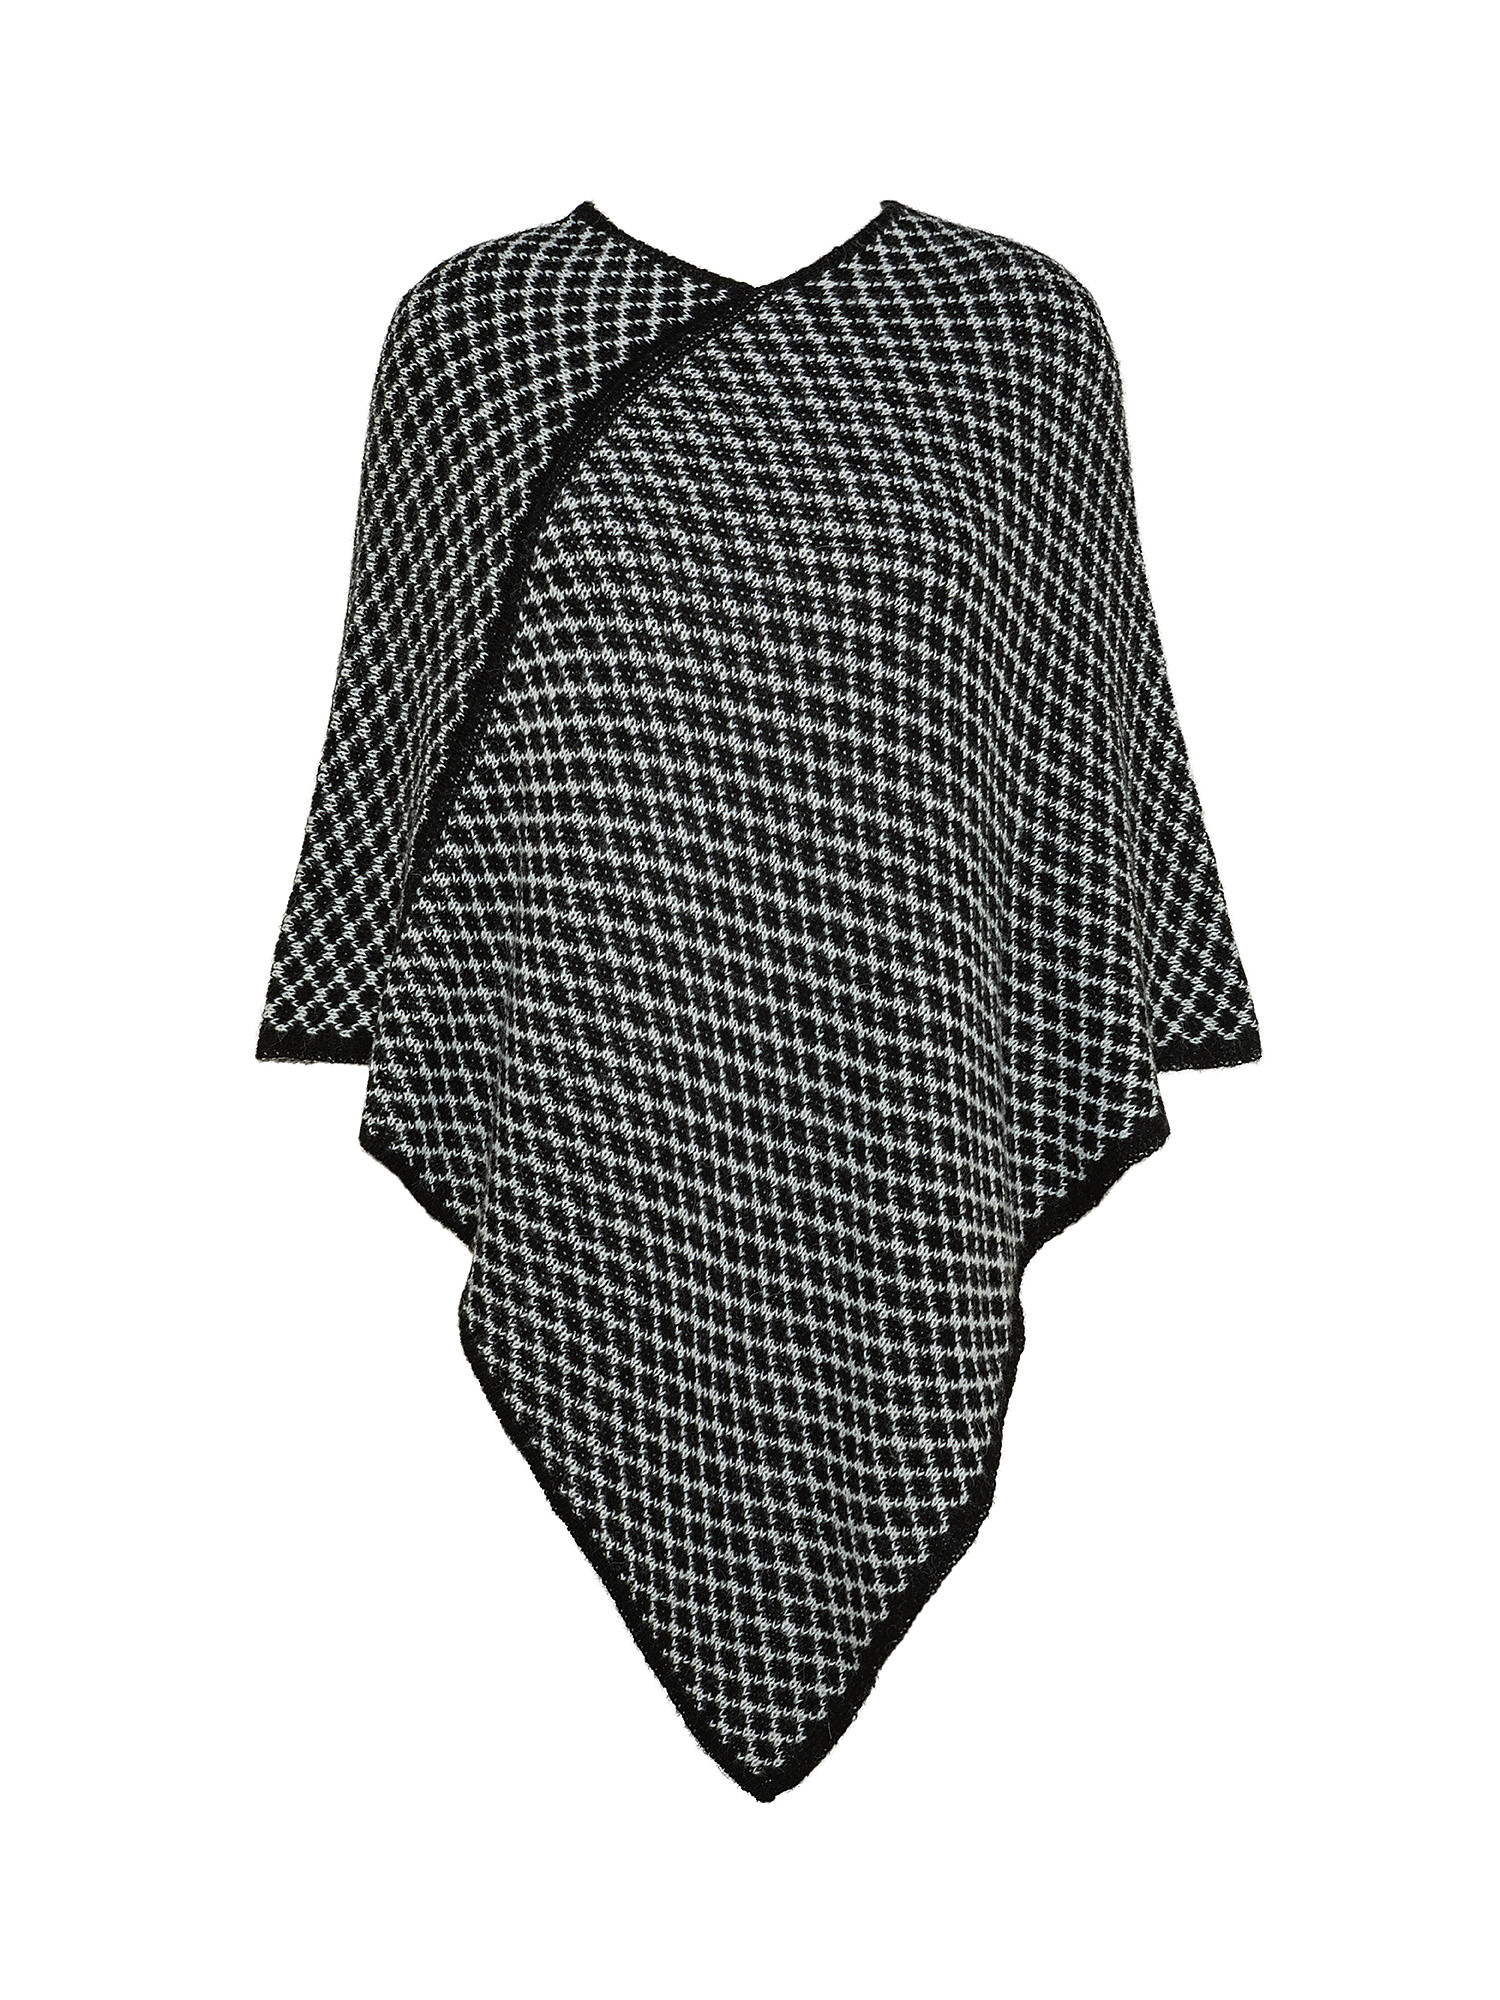 Cape with diamond pattern, White, large image number 0